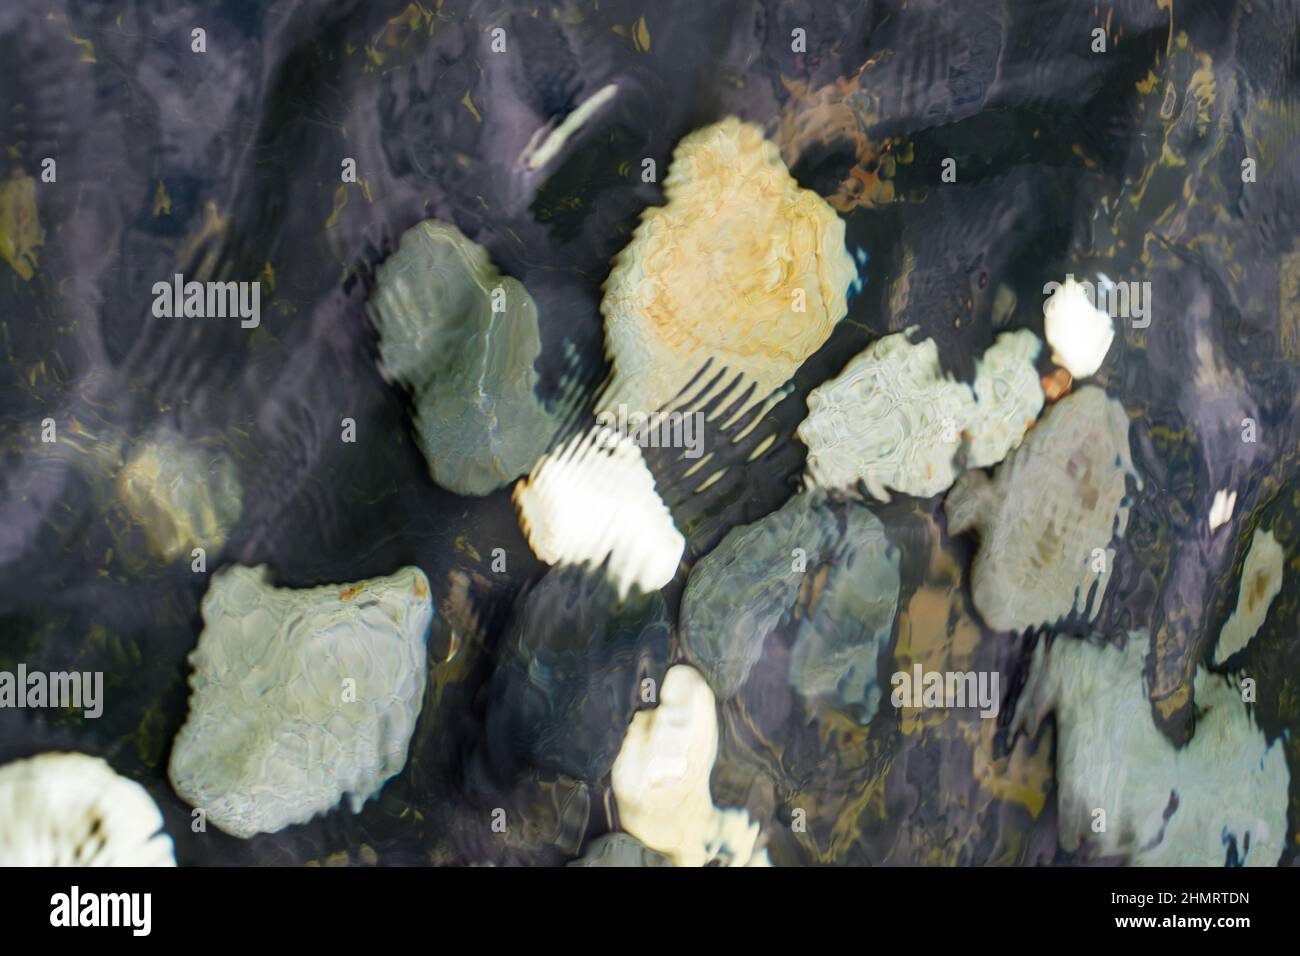 looking at the pebble stones in the water through wobbling surface Stock Photo